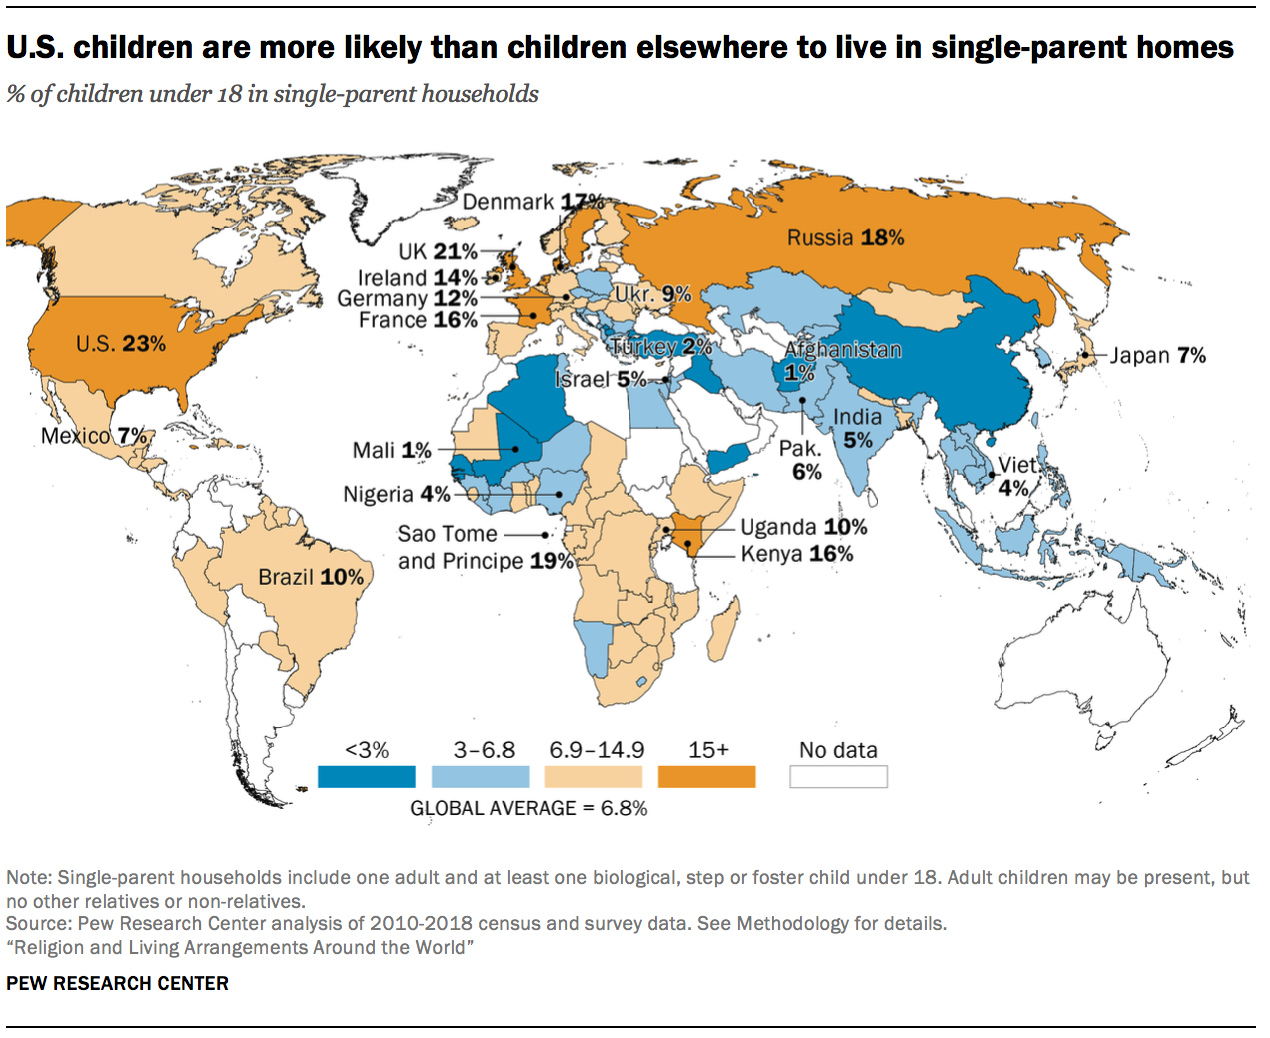 U.S. children are more likely than children elsewhere to live in single-parent homes